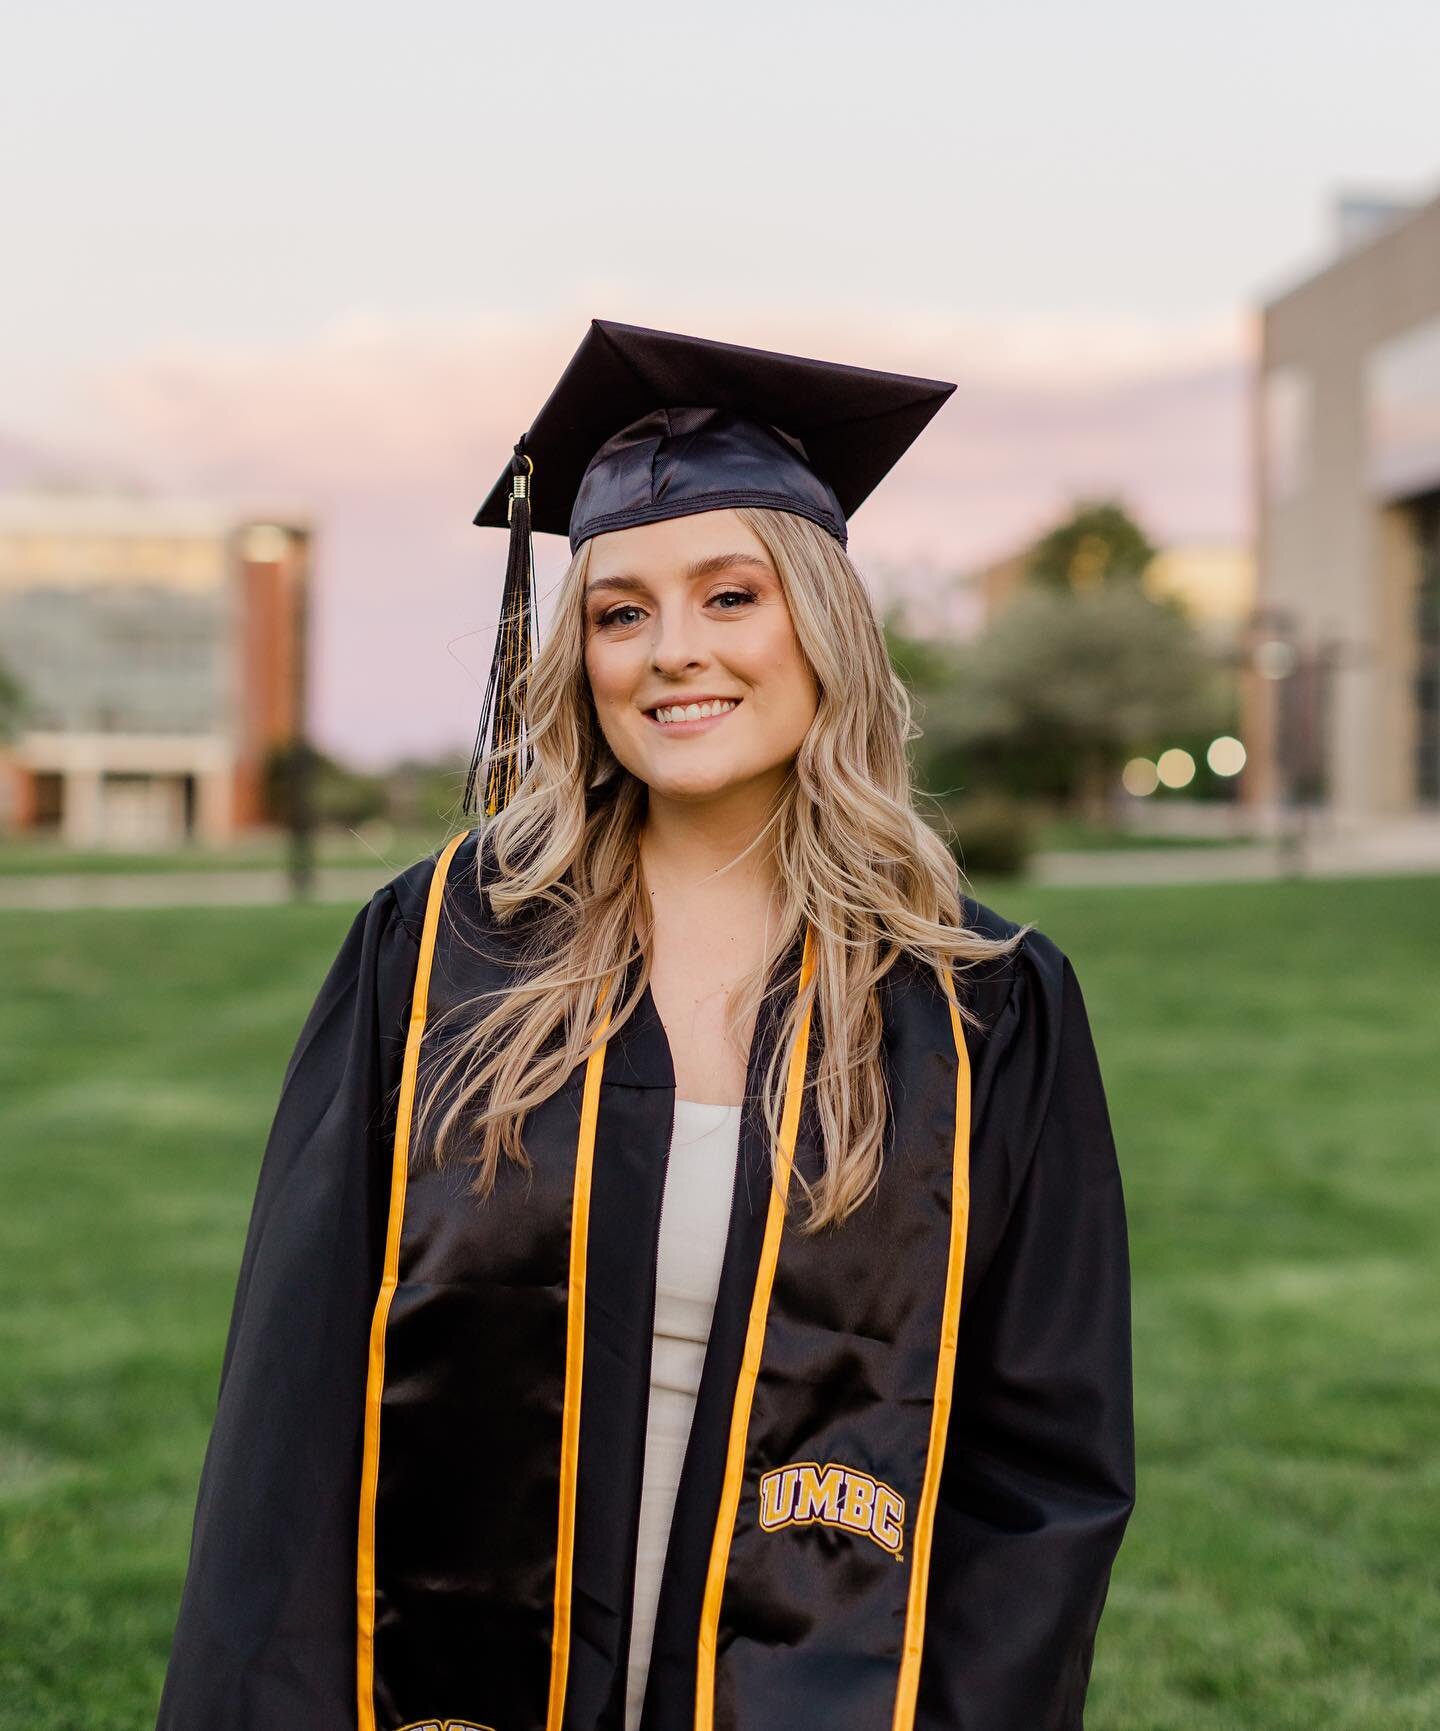 GRAD FACE! So much love for you Charla, can&rsquo;t wait to watch your journey from here on out! 🎉
.
.
Makeup by me
Photographer: @peachmayphotography 
.
#grad #graduation #umbc #umbcgrad #makeup #graduationmakeup #makeupartist #baltimoremua